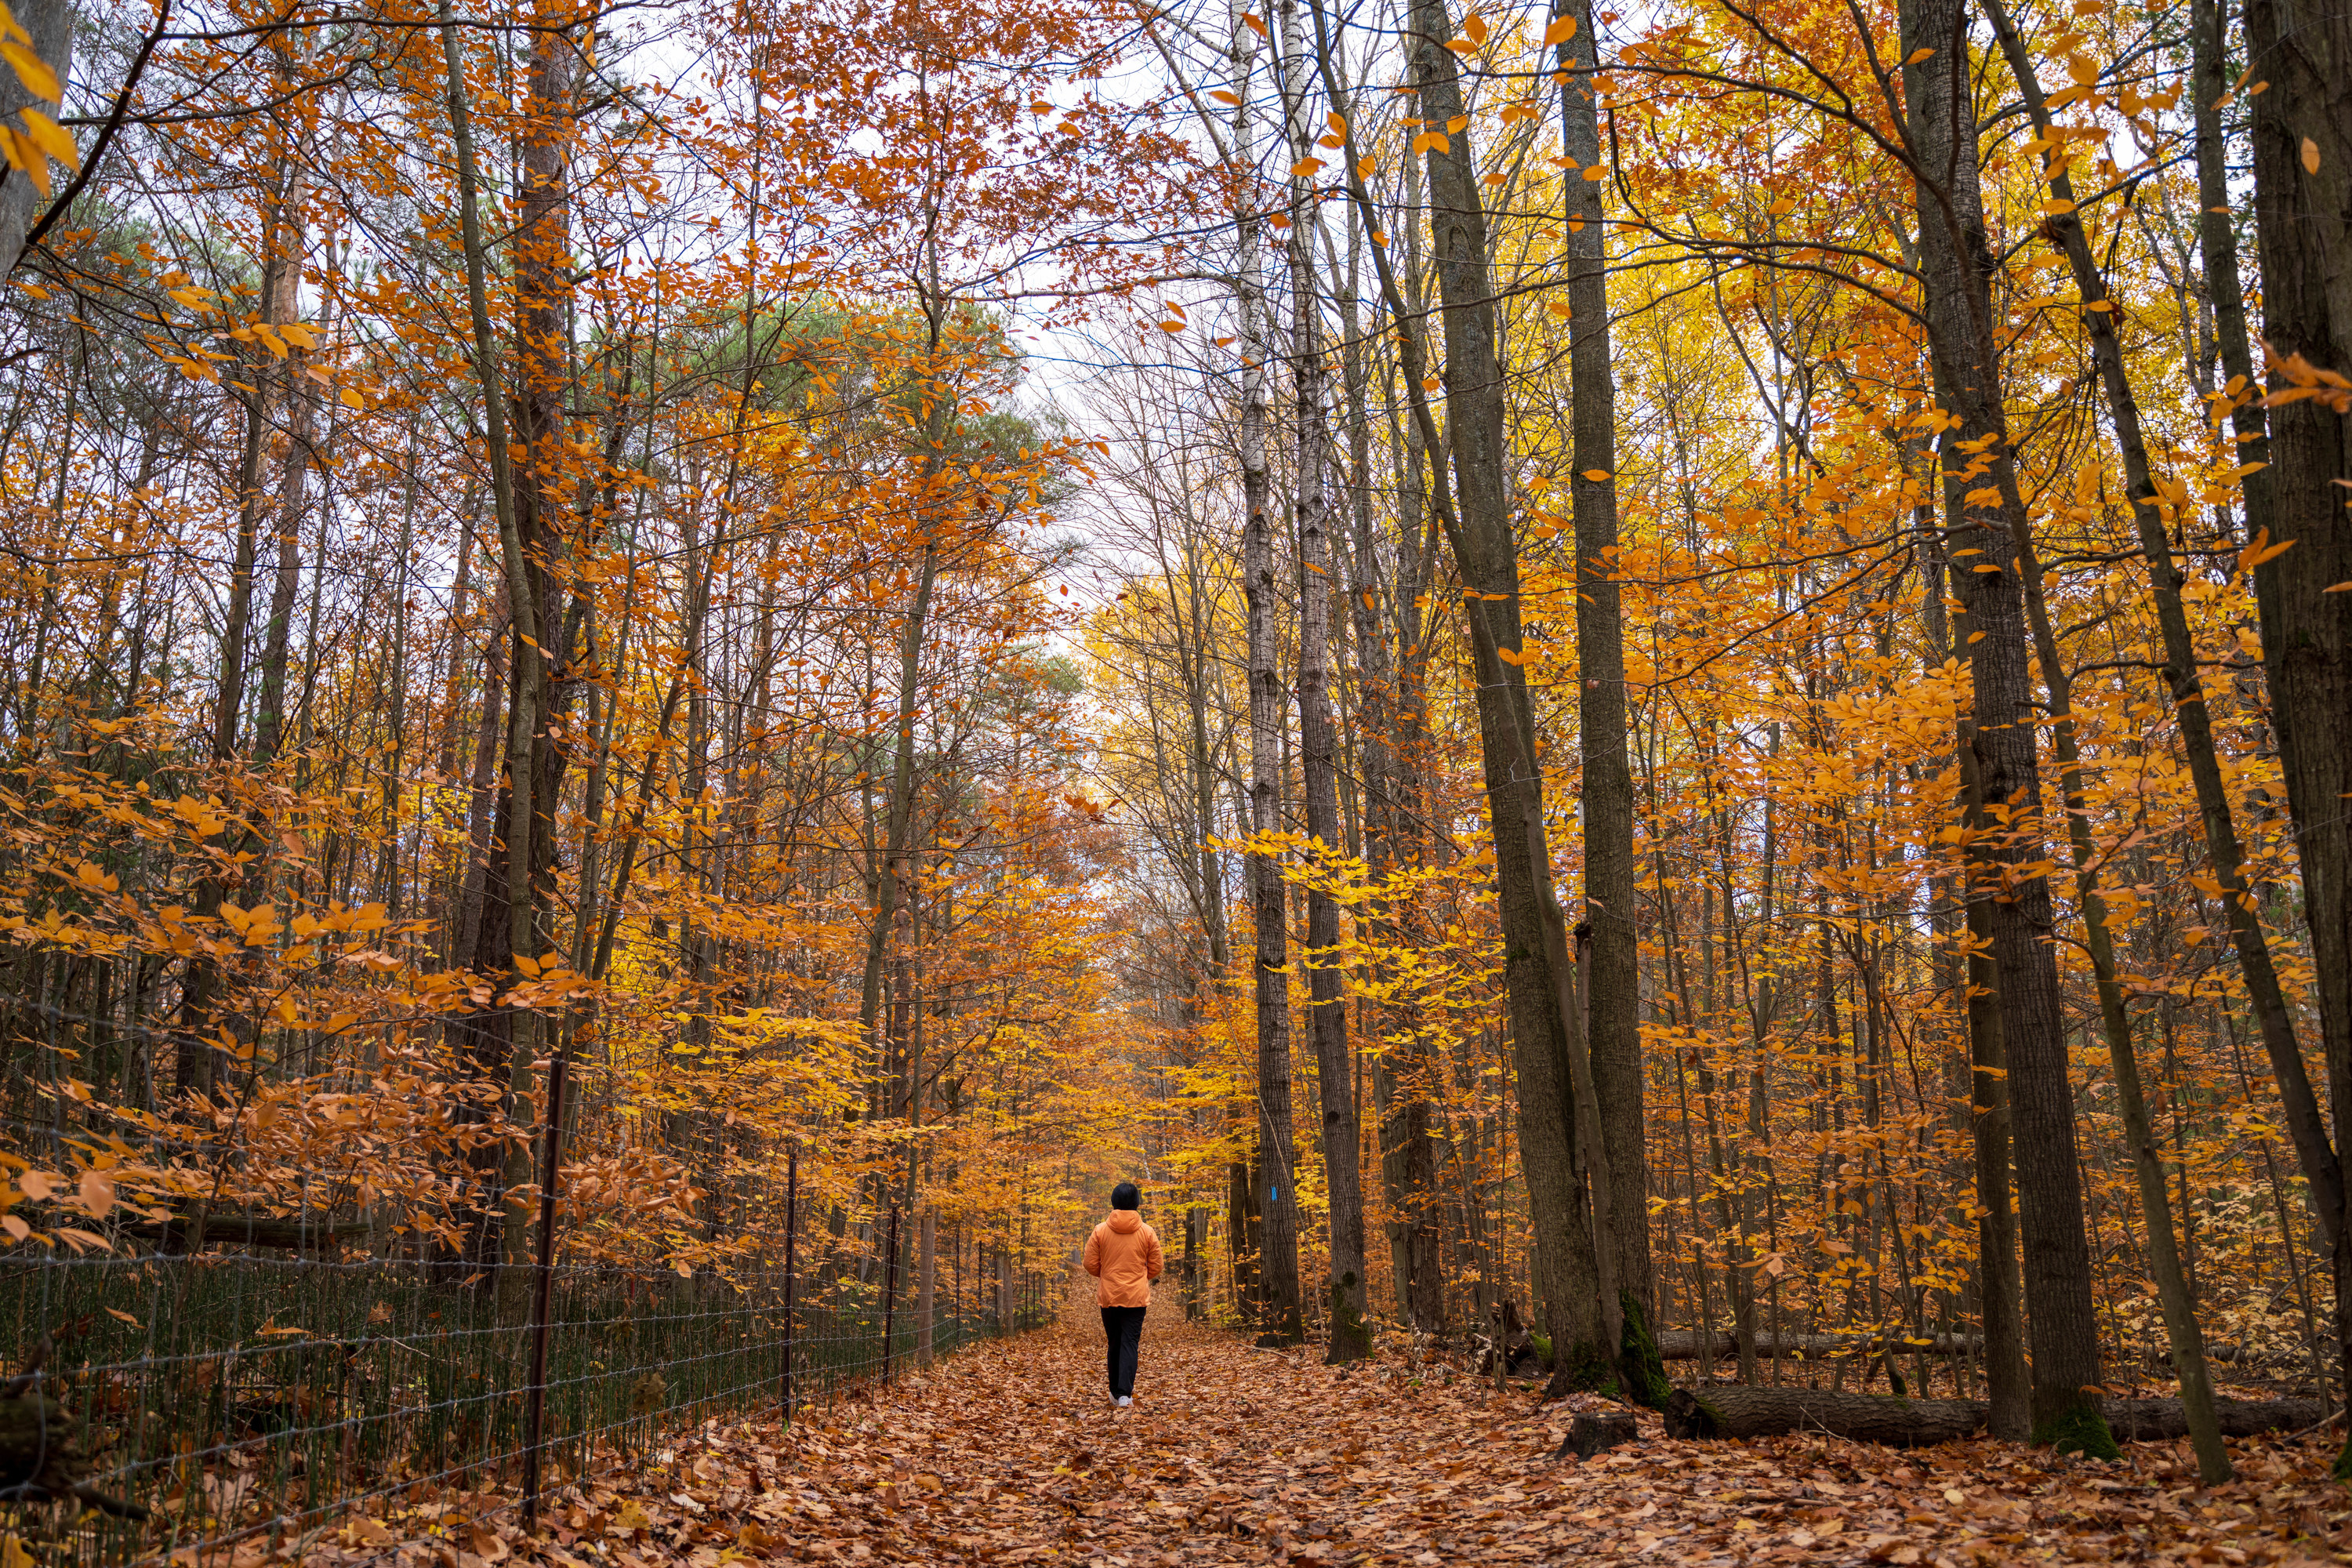 a person walking in a forest during autumn